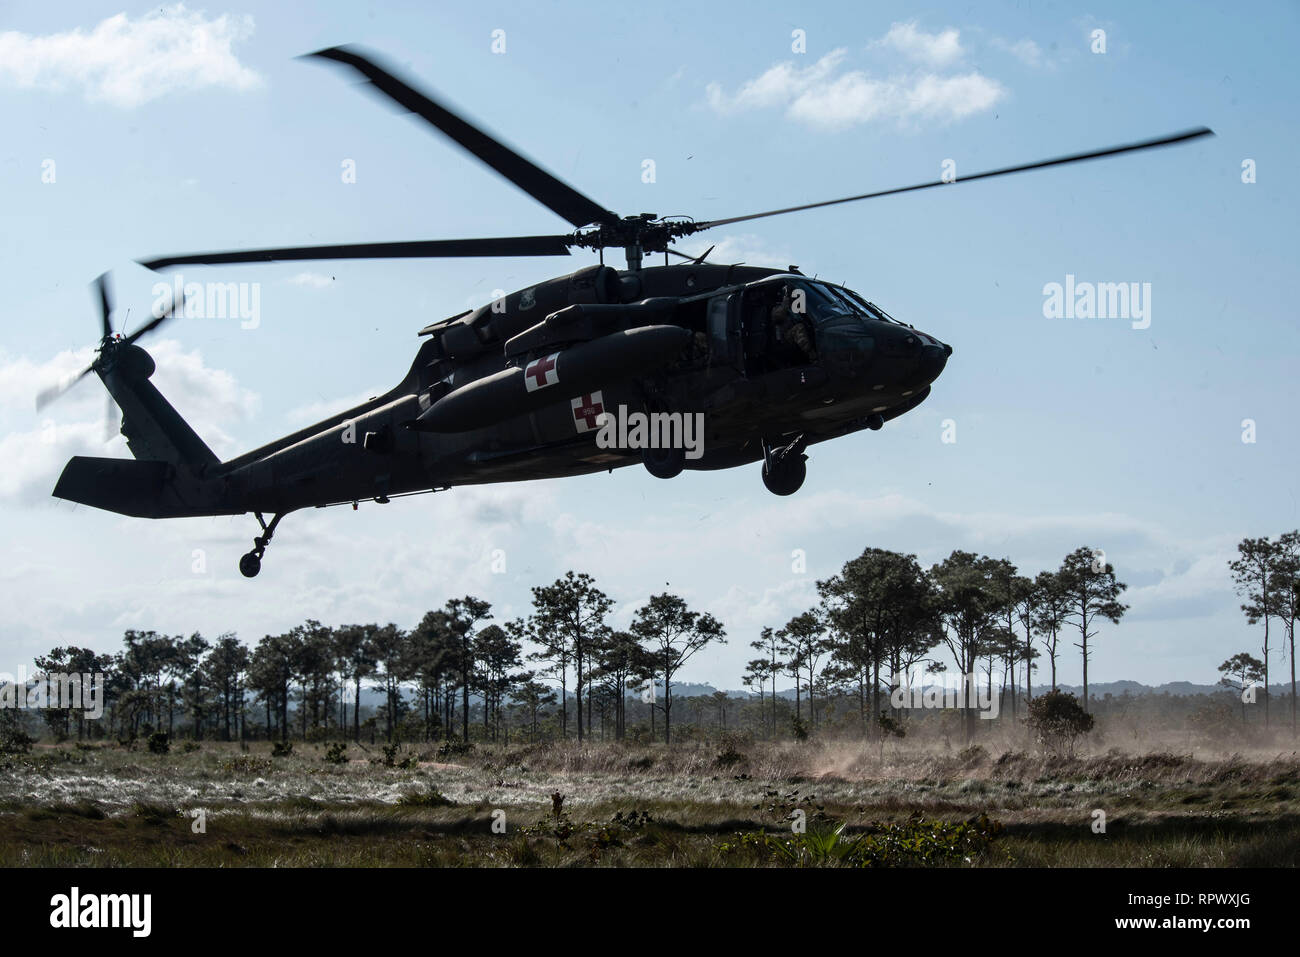 The 228th Aviation Regiment performs aerial gunnery training at a range in Belize, Feb. 12, 2019. During the training, 228th Soldiers qualified on the M-240H Machine Gun in either the Blackhawk or the CH-47 Chinook to maintain their combat capabilities. During the exercise, the regiment also planned out air assaults with their Belizean and British counterparts to provide an opportunity for the three countries to come together and practice coordinating operations with the other armed forces. (U.S. Air Force photo by Senior Airman Destinee Sweeney) Stock Photo